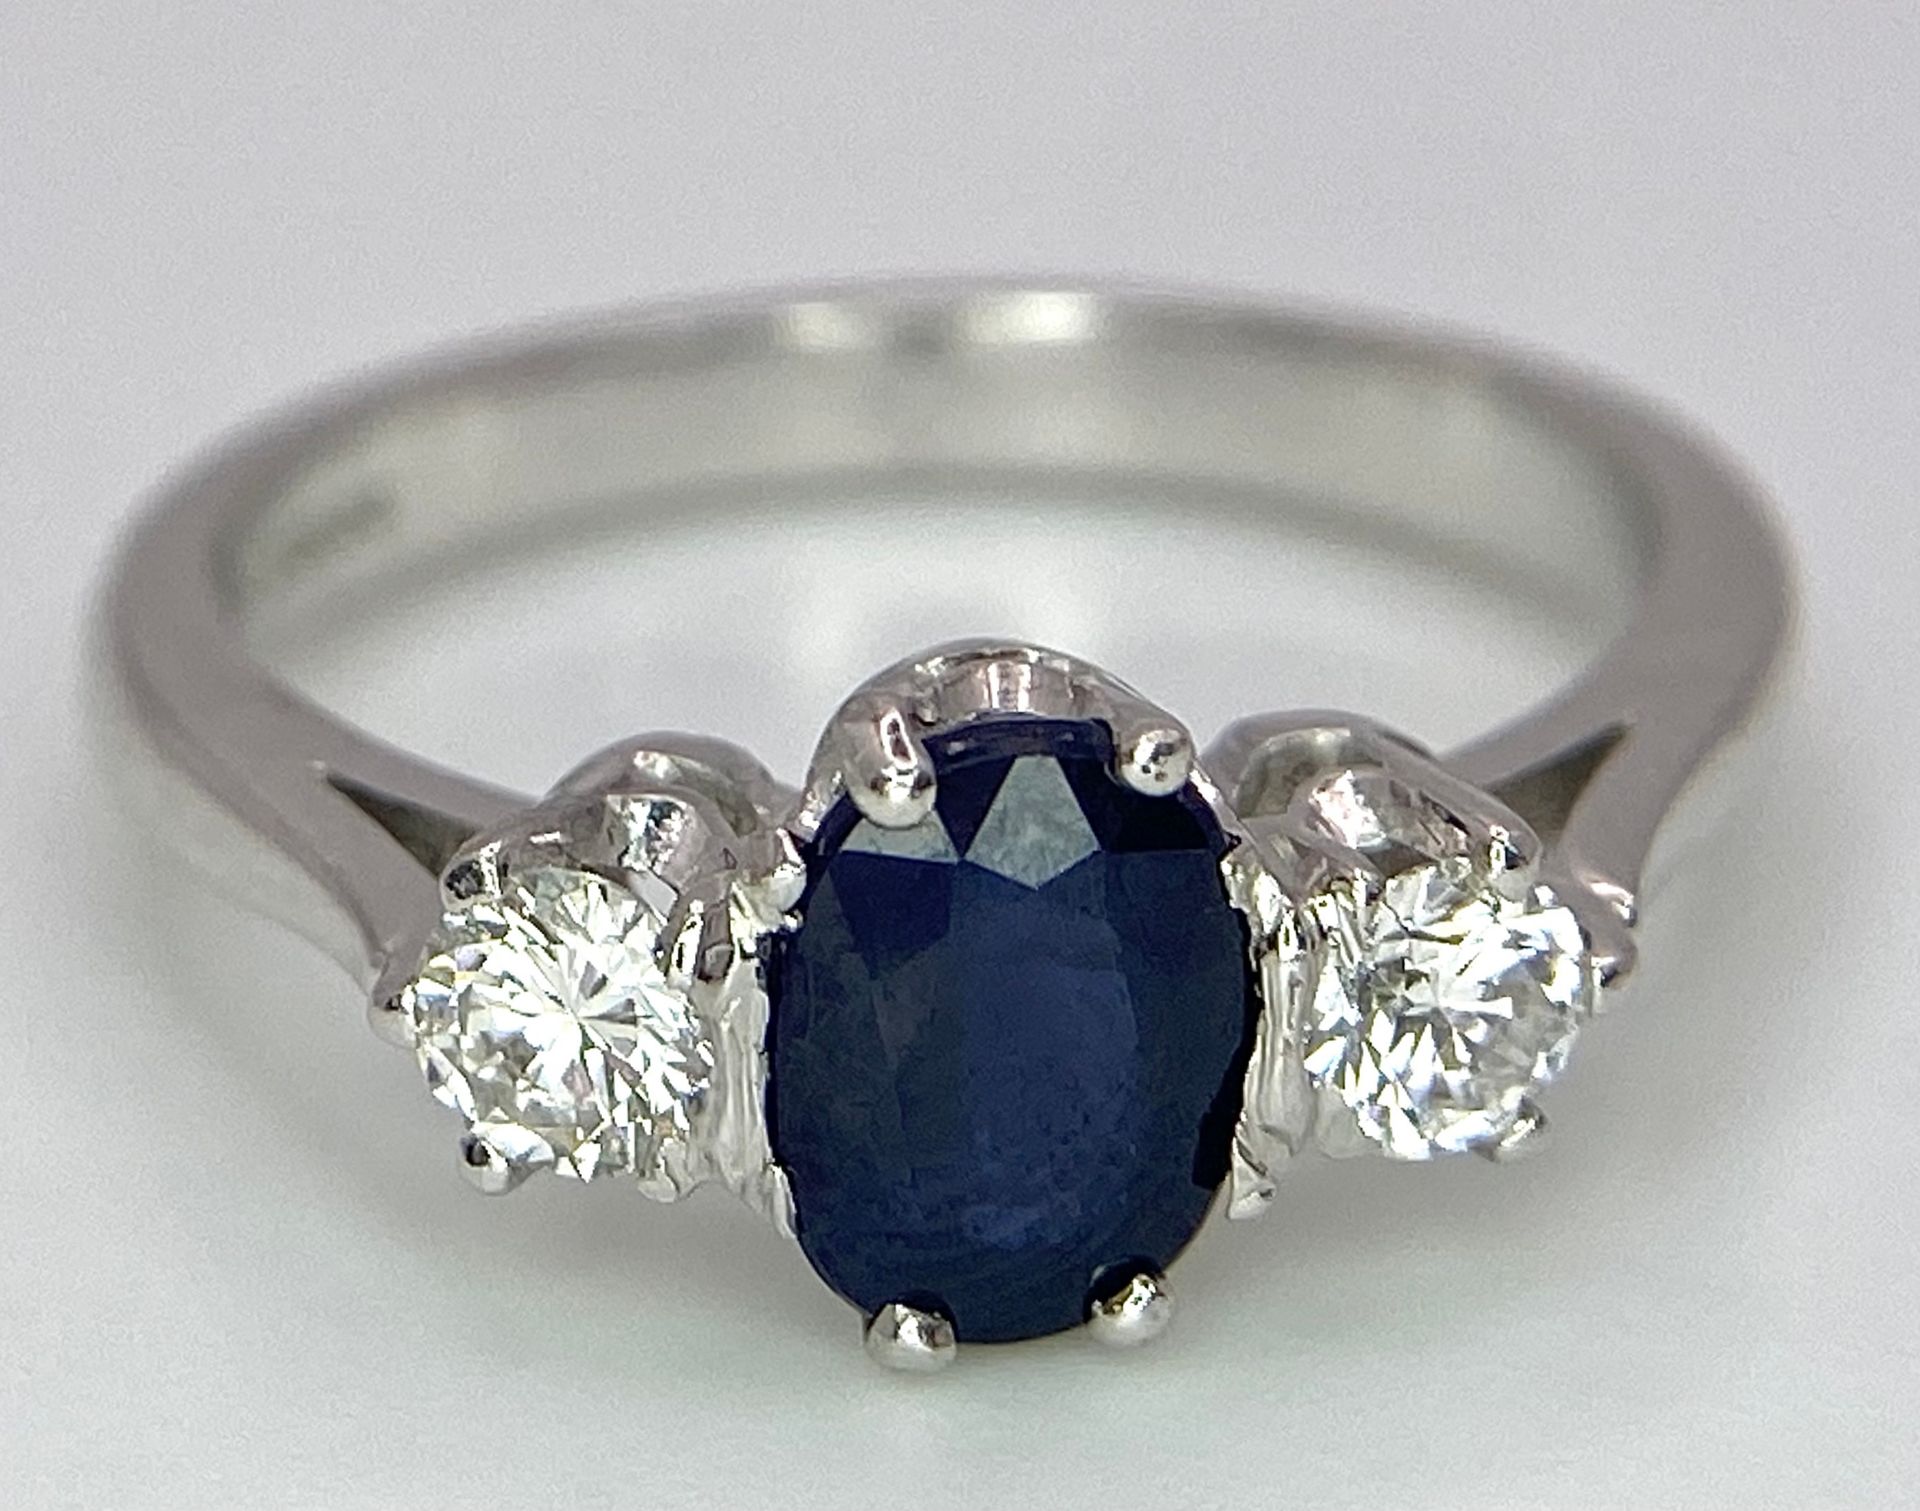 AN 18K WHITE GOLD, DIAMOND AND SAPPHIRE 3 STONE RING. OVAL BLUE SAPPHIRE - 0.75CT AND 0.30CT OF - Image 4 of 6